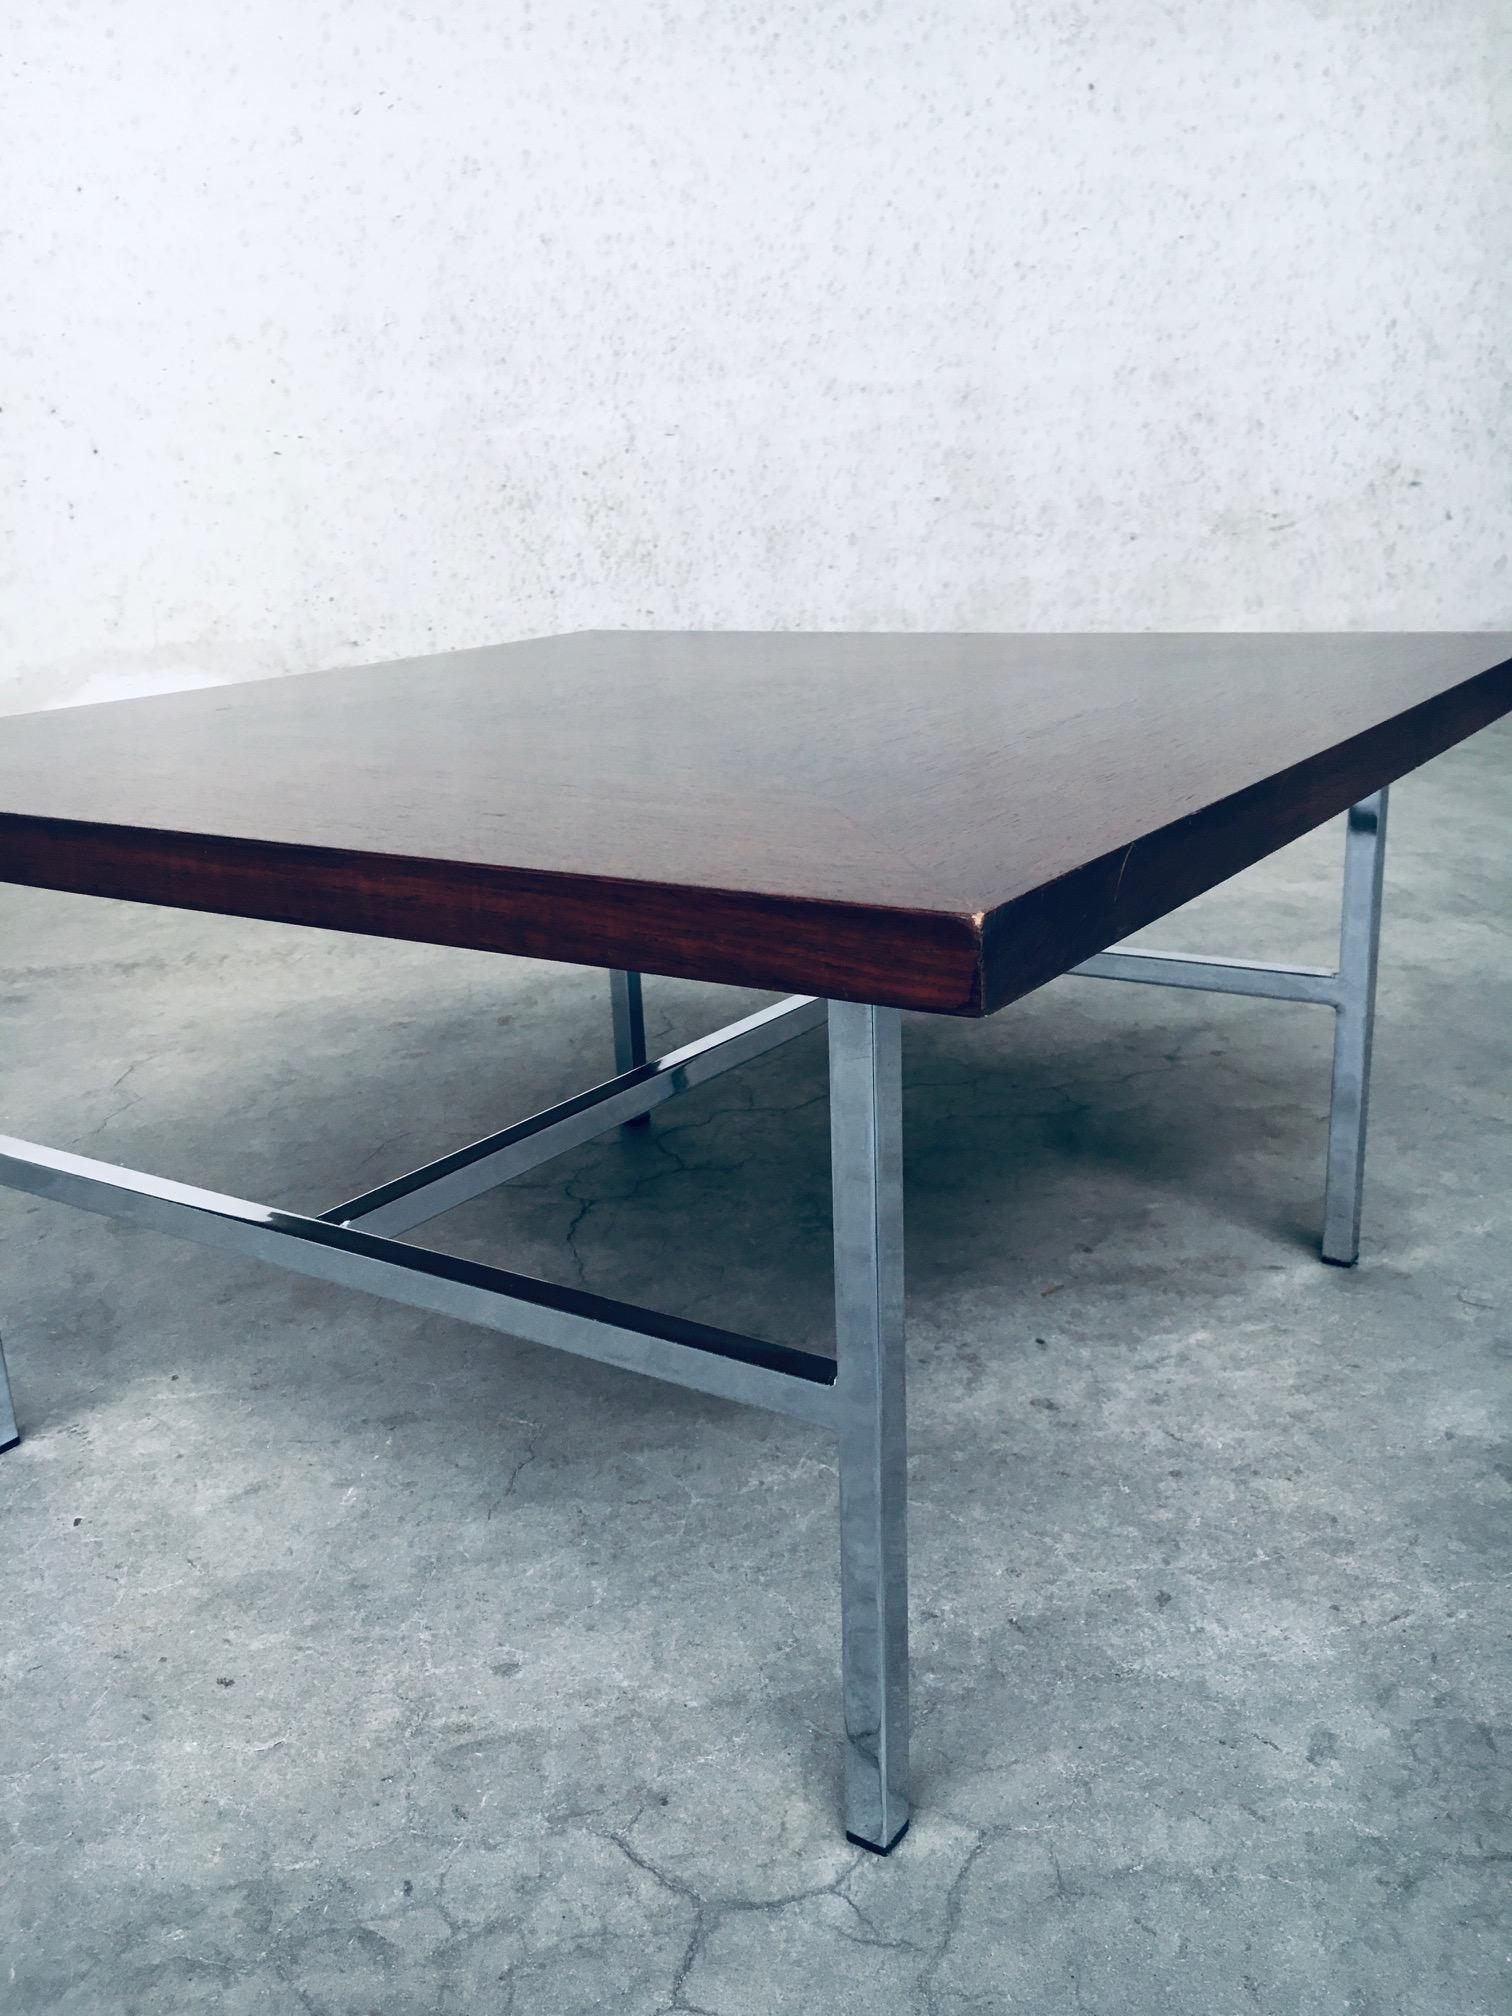 Midcentury Dutch Design Coffee Table, Netherlands 1960's For Sale 7